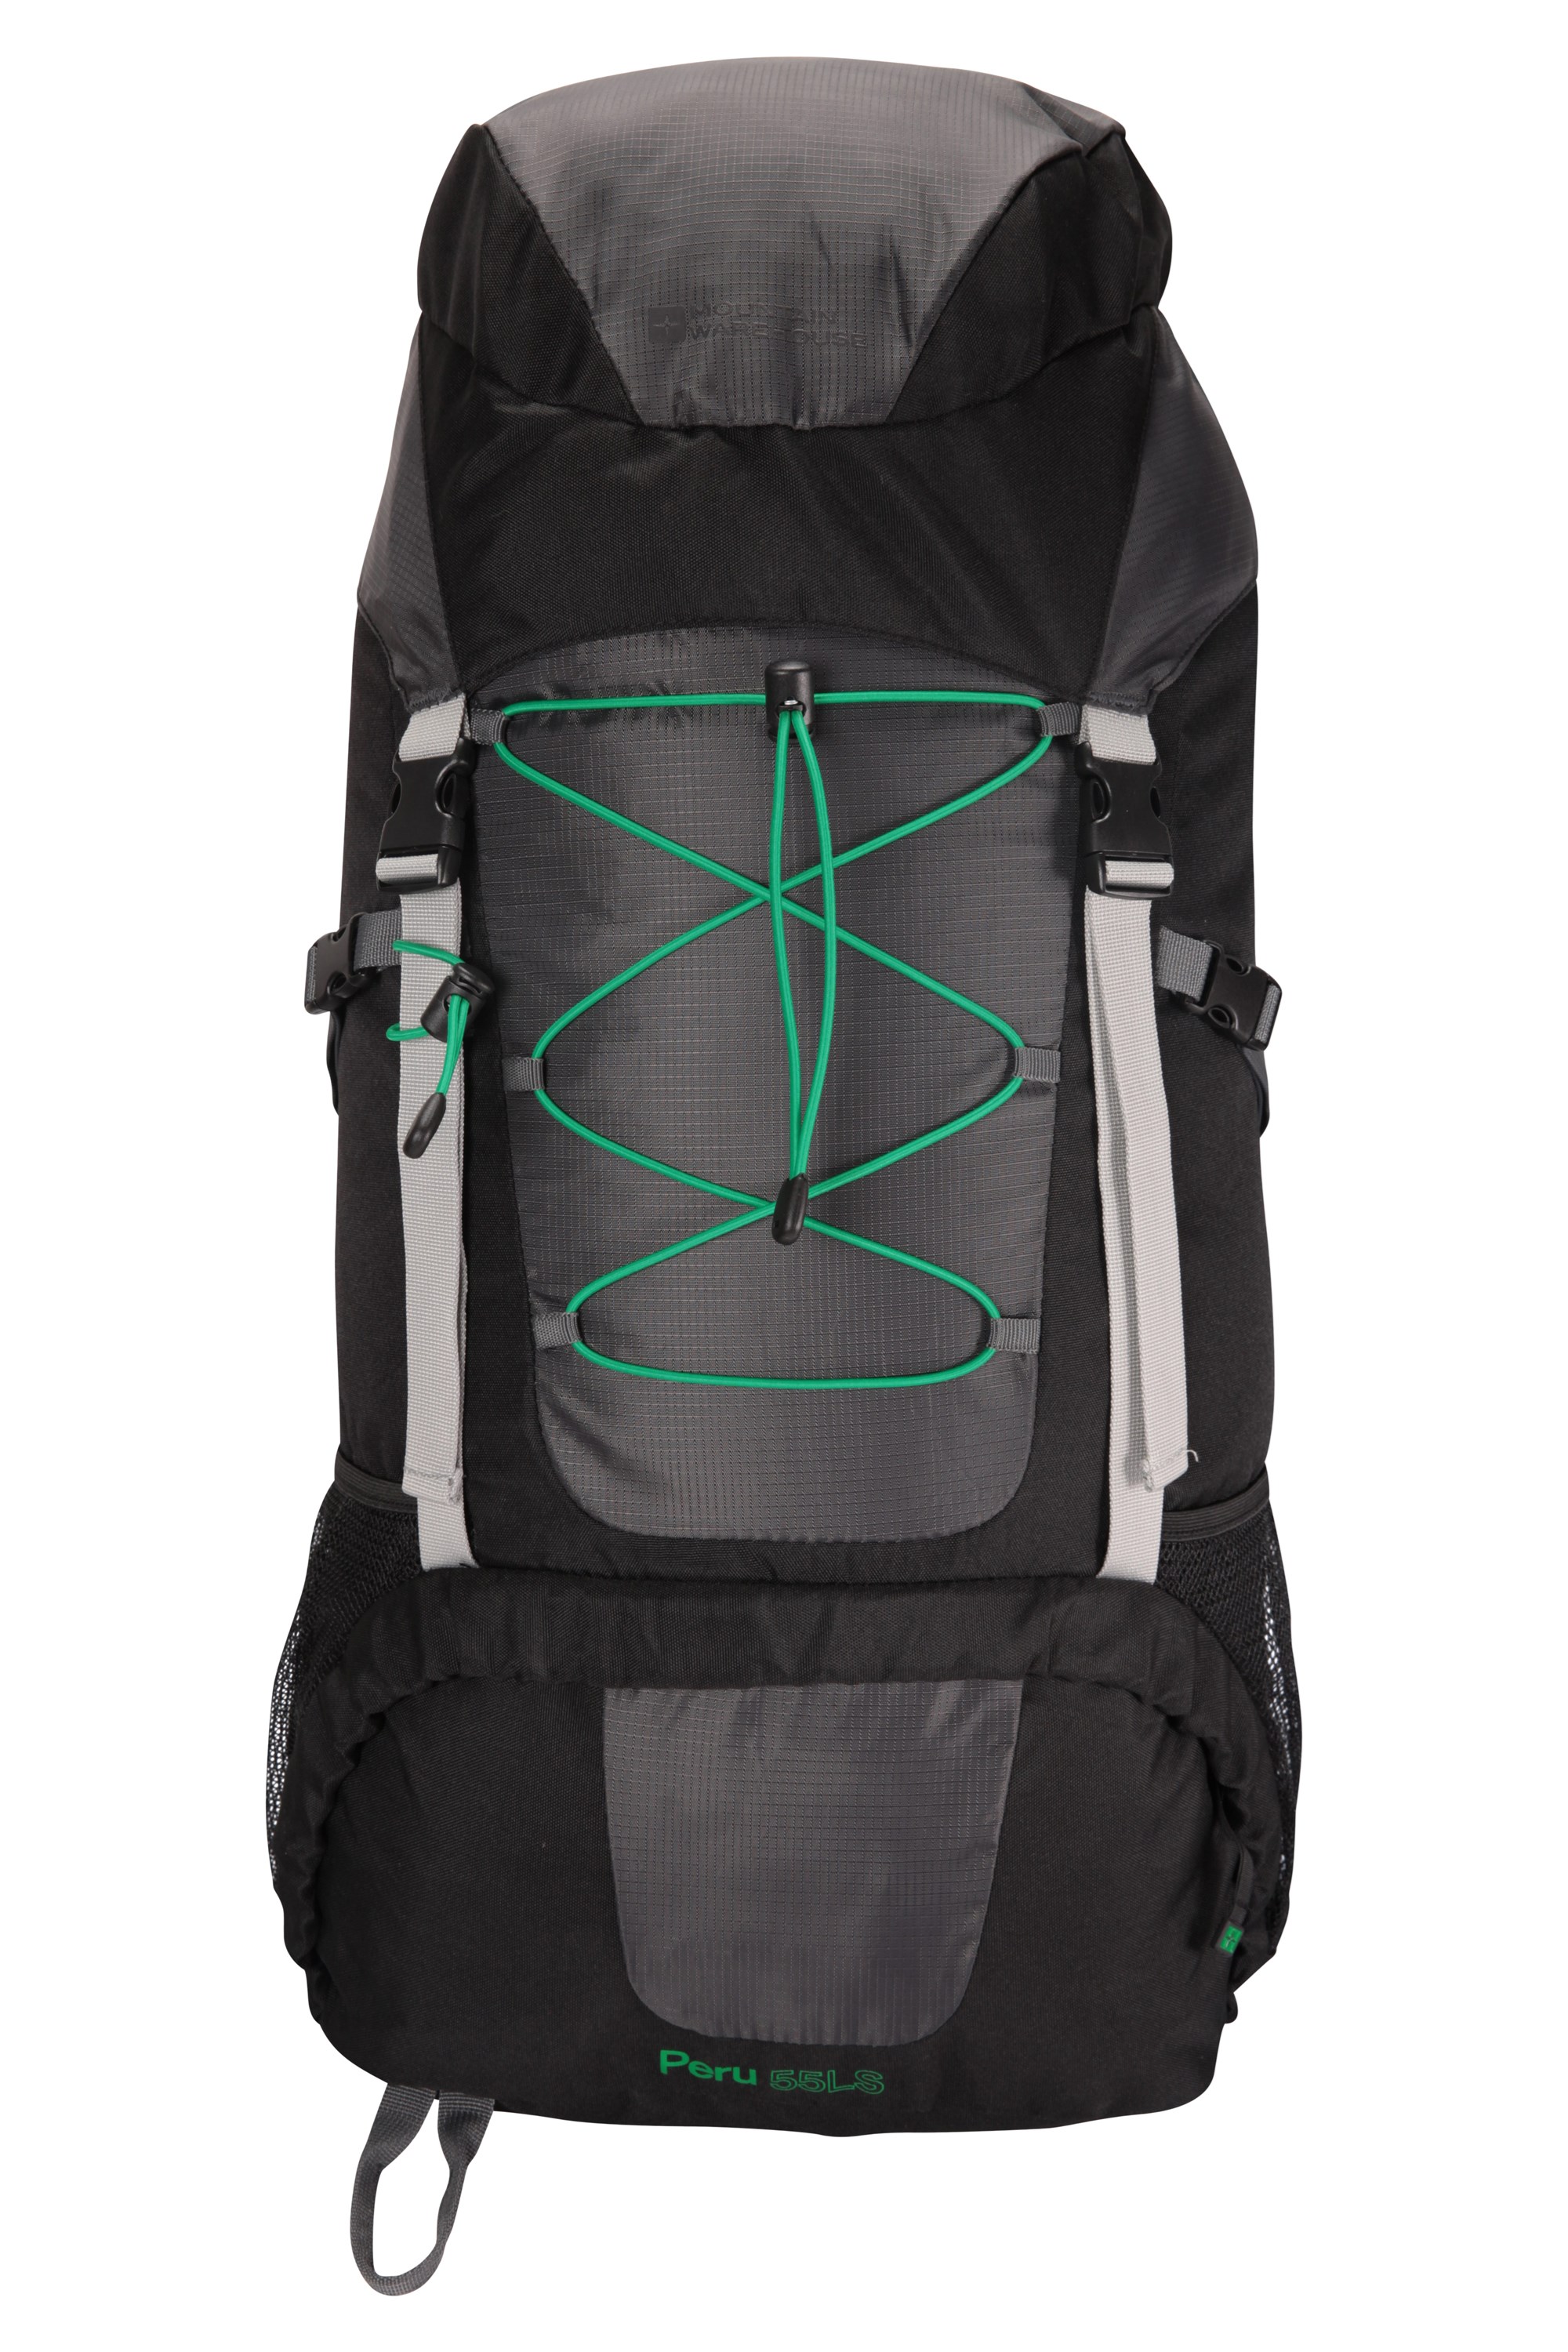 Inca Extreme 65L Backpack | Mountain Warehouse US